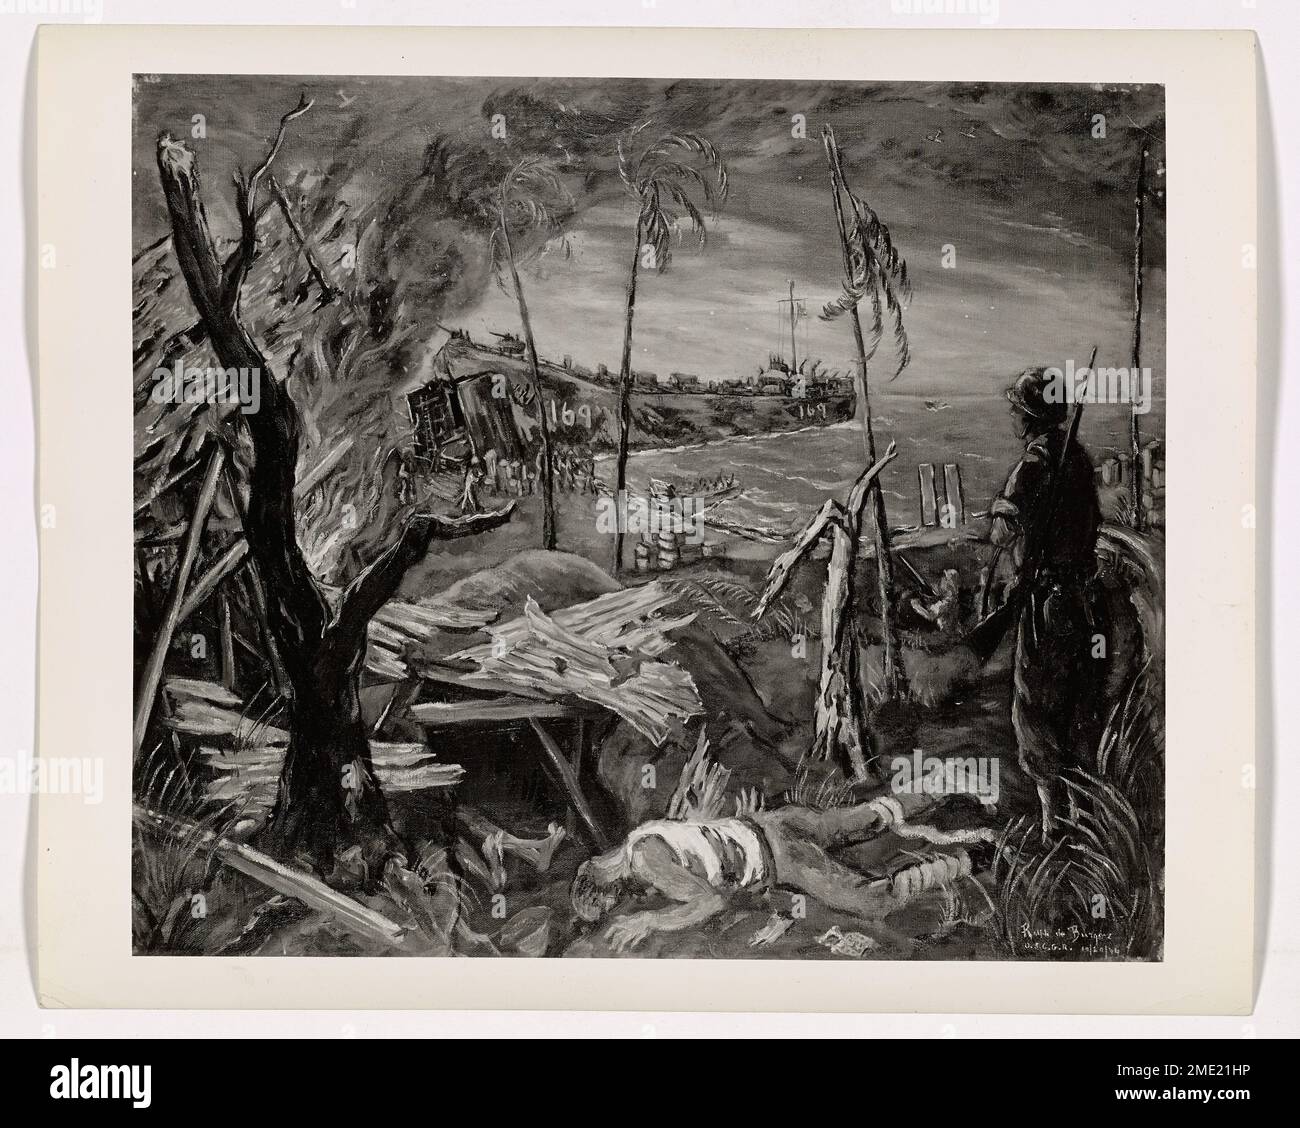 D-day at Dulag. This image depicts artwork of the invasion of Dulag in the Philippines by means of Coast Guard-manned LST, painted by Coast Guard Combat Artist Ralph de Burgos. Stock Photo